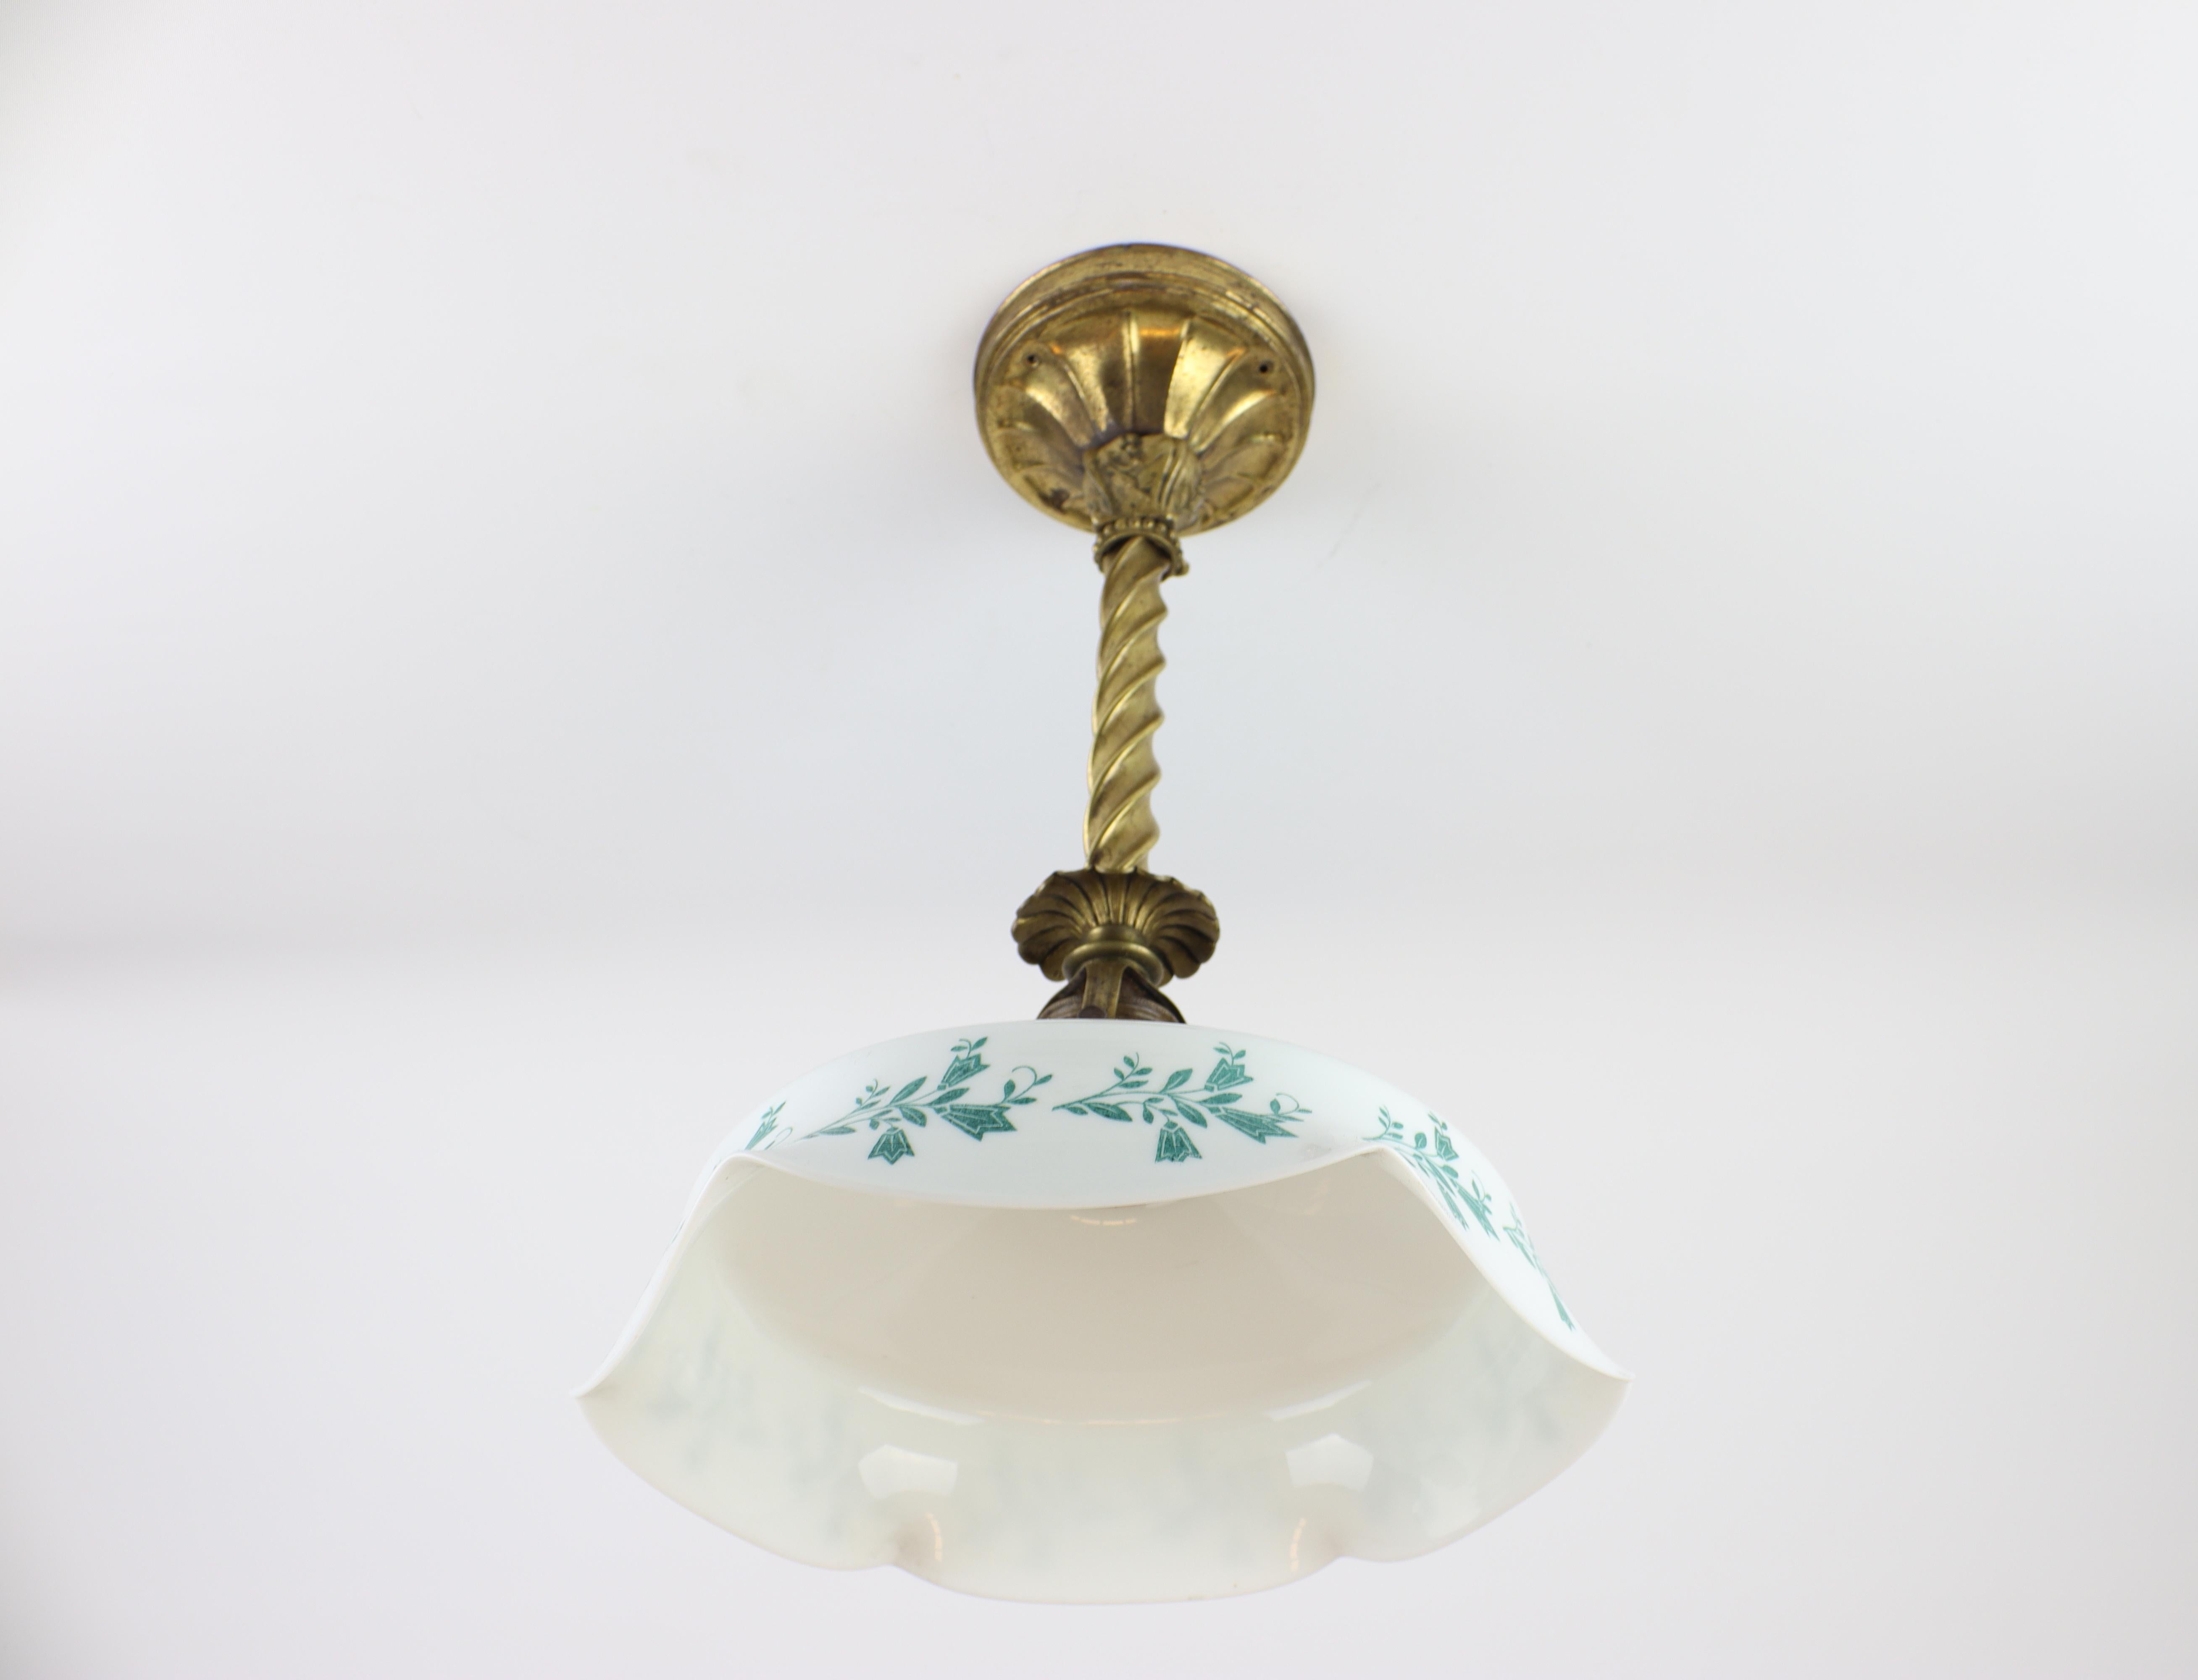 Art Nouveau Ceiling Lamp with Decorative Holder In Good Condition For Sale In Brno, CZ